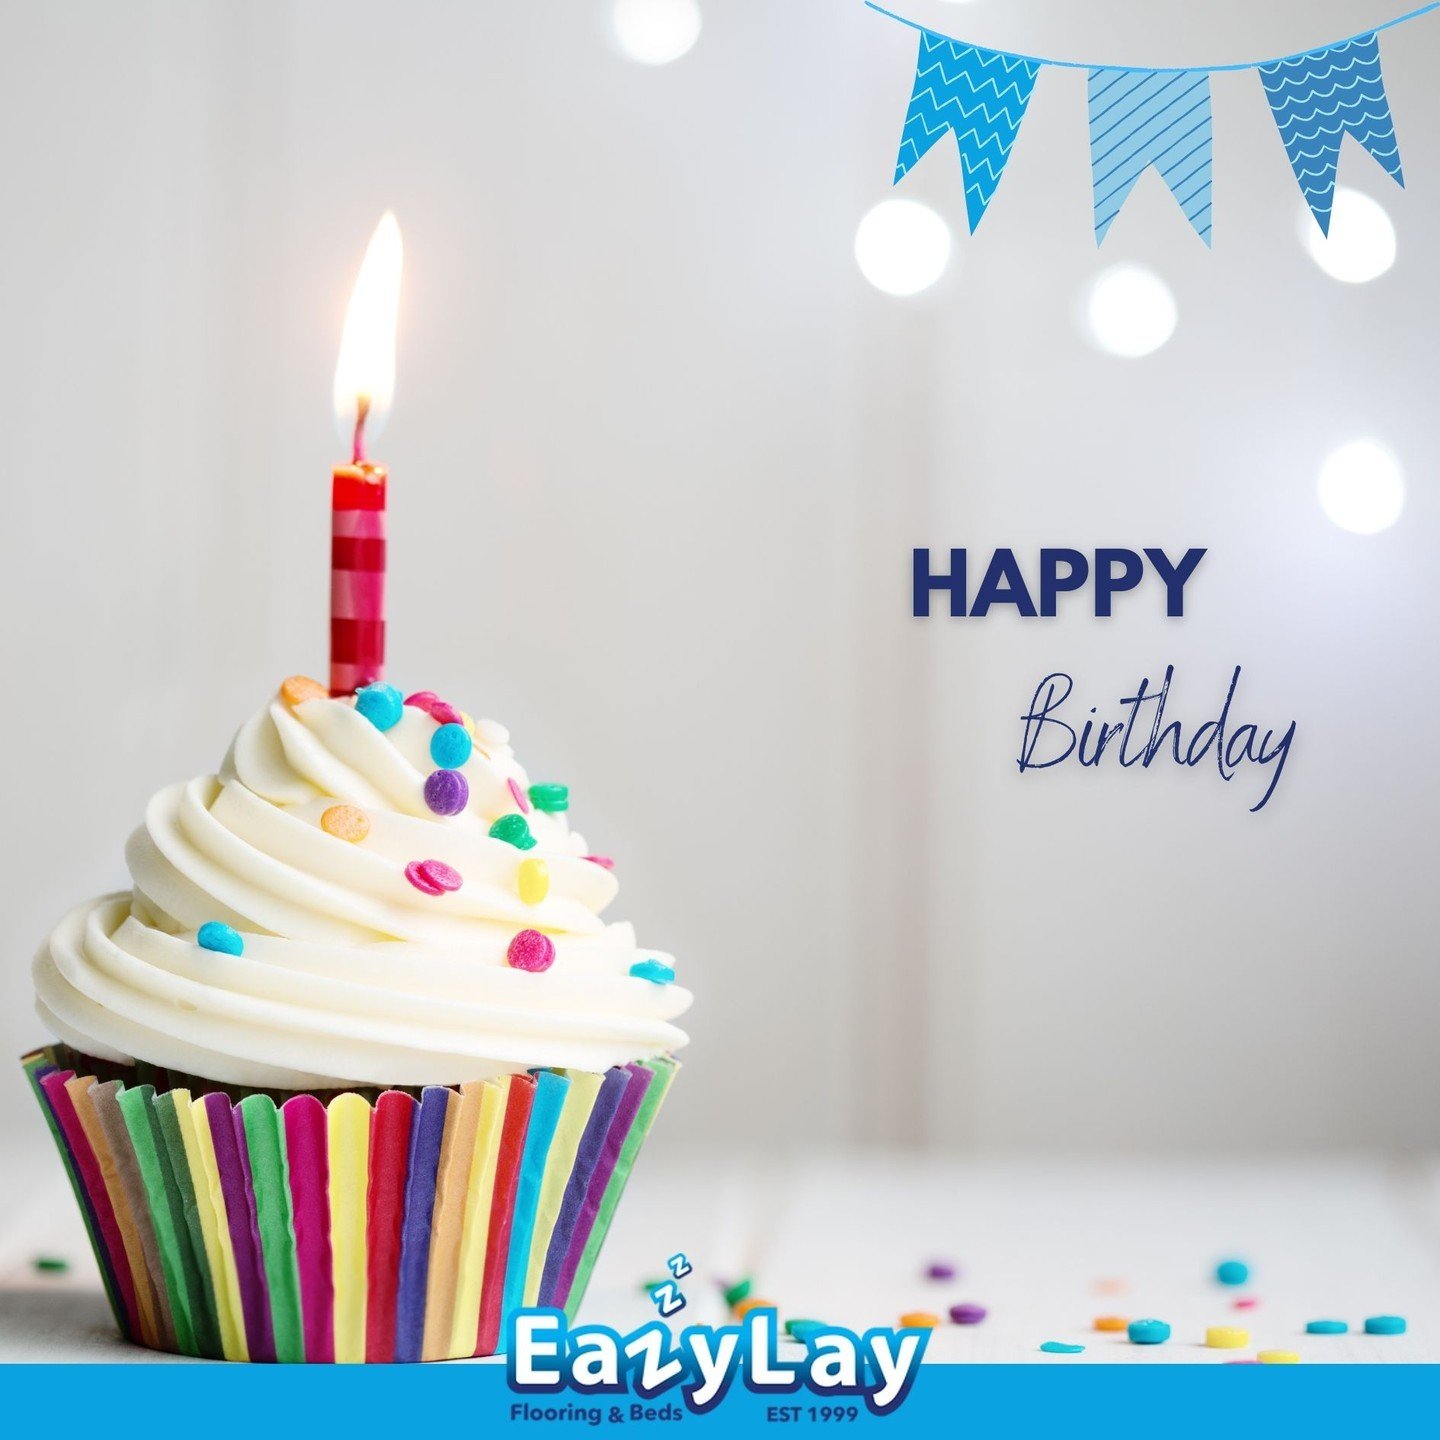 Celebrating Darryl&rsquo;s birthday today! 🎉 Without him at Eazylay, you'd be paying top dollar elsewhere. Thanks to Darryl, we're keeping prices low that will absolutely floor you! #HappyBirthdayDarryl #EazylaySavings 🎂🏠